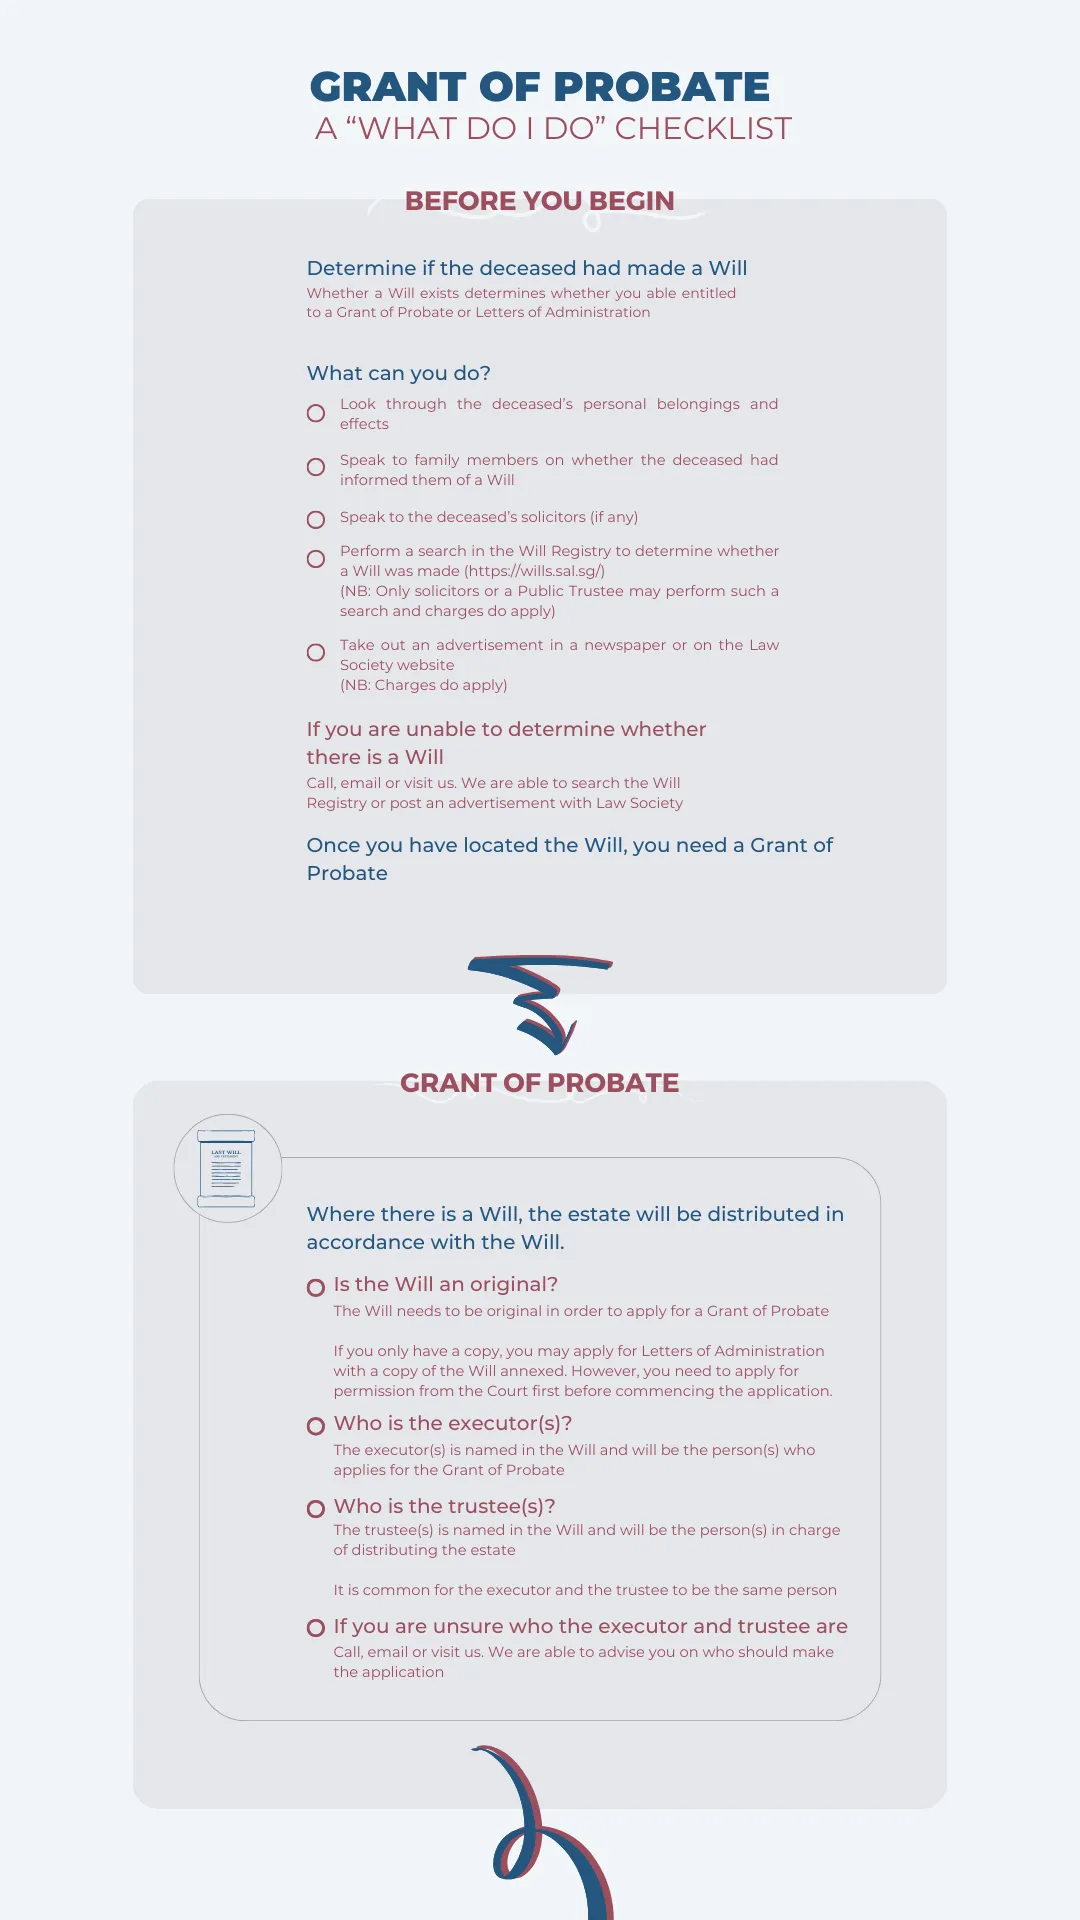 Download our Probate - A “What Do I Do” Checklist now!